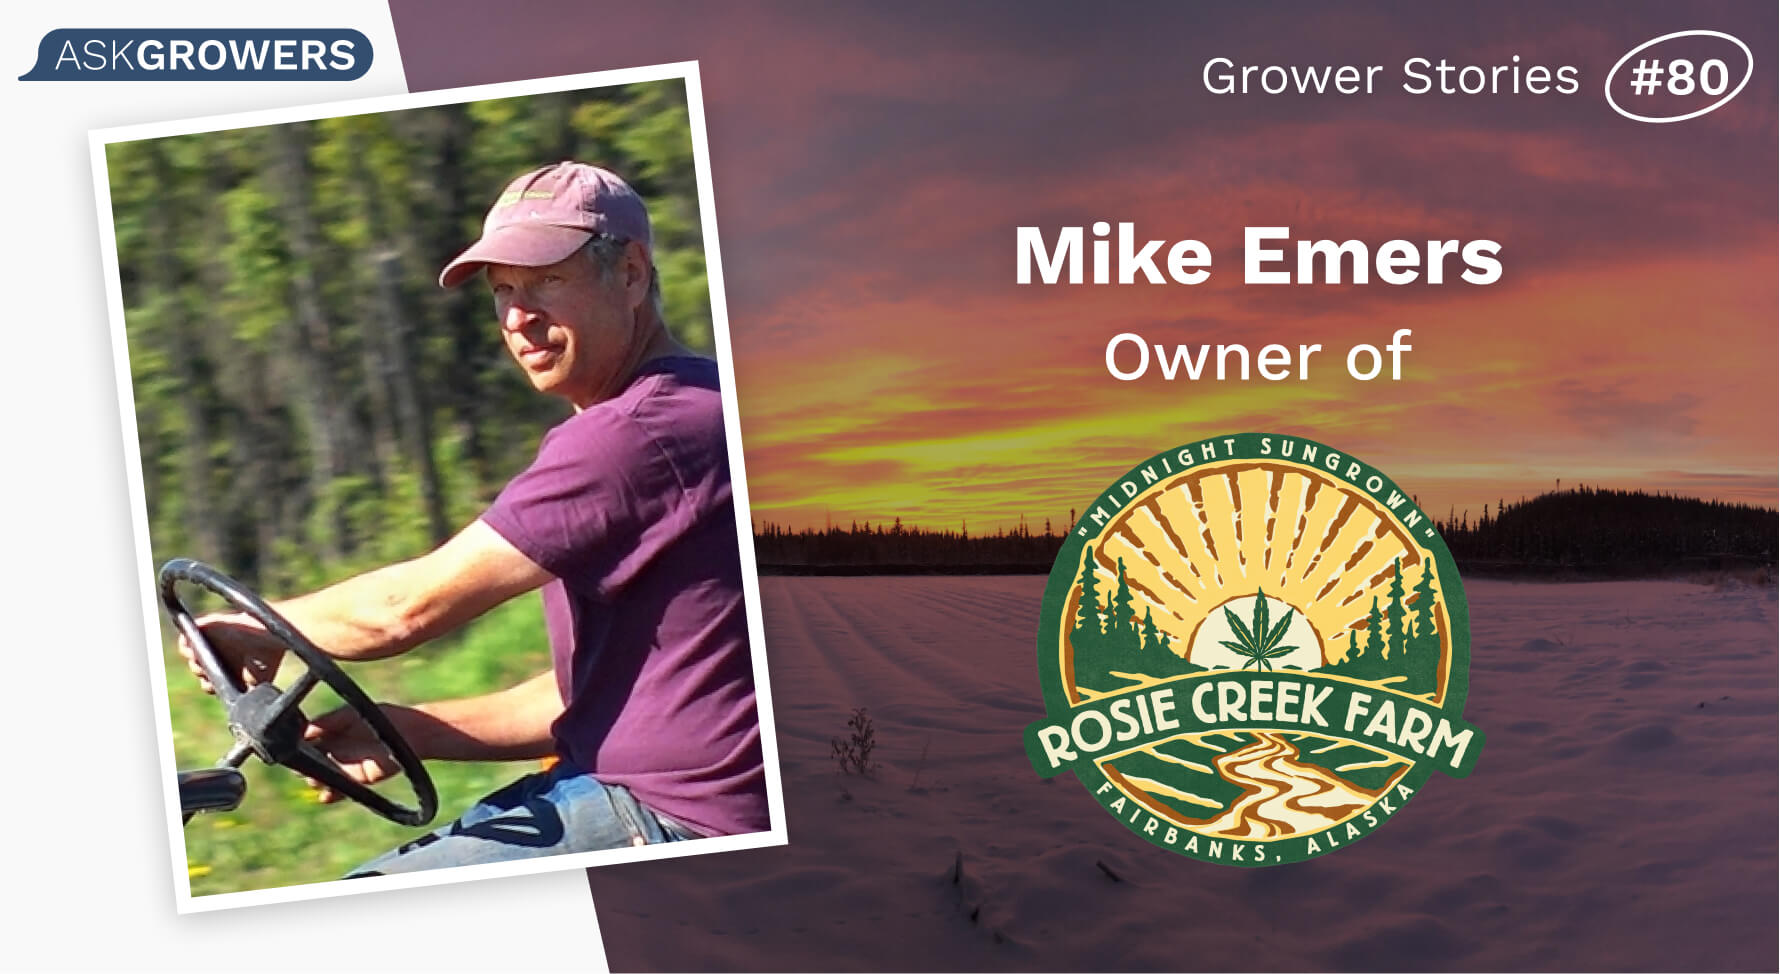 Grower Stories #80: Michael Emers